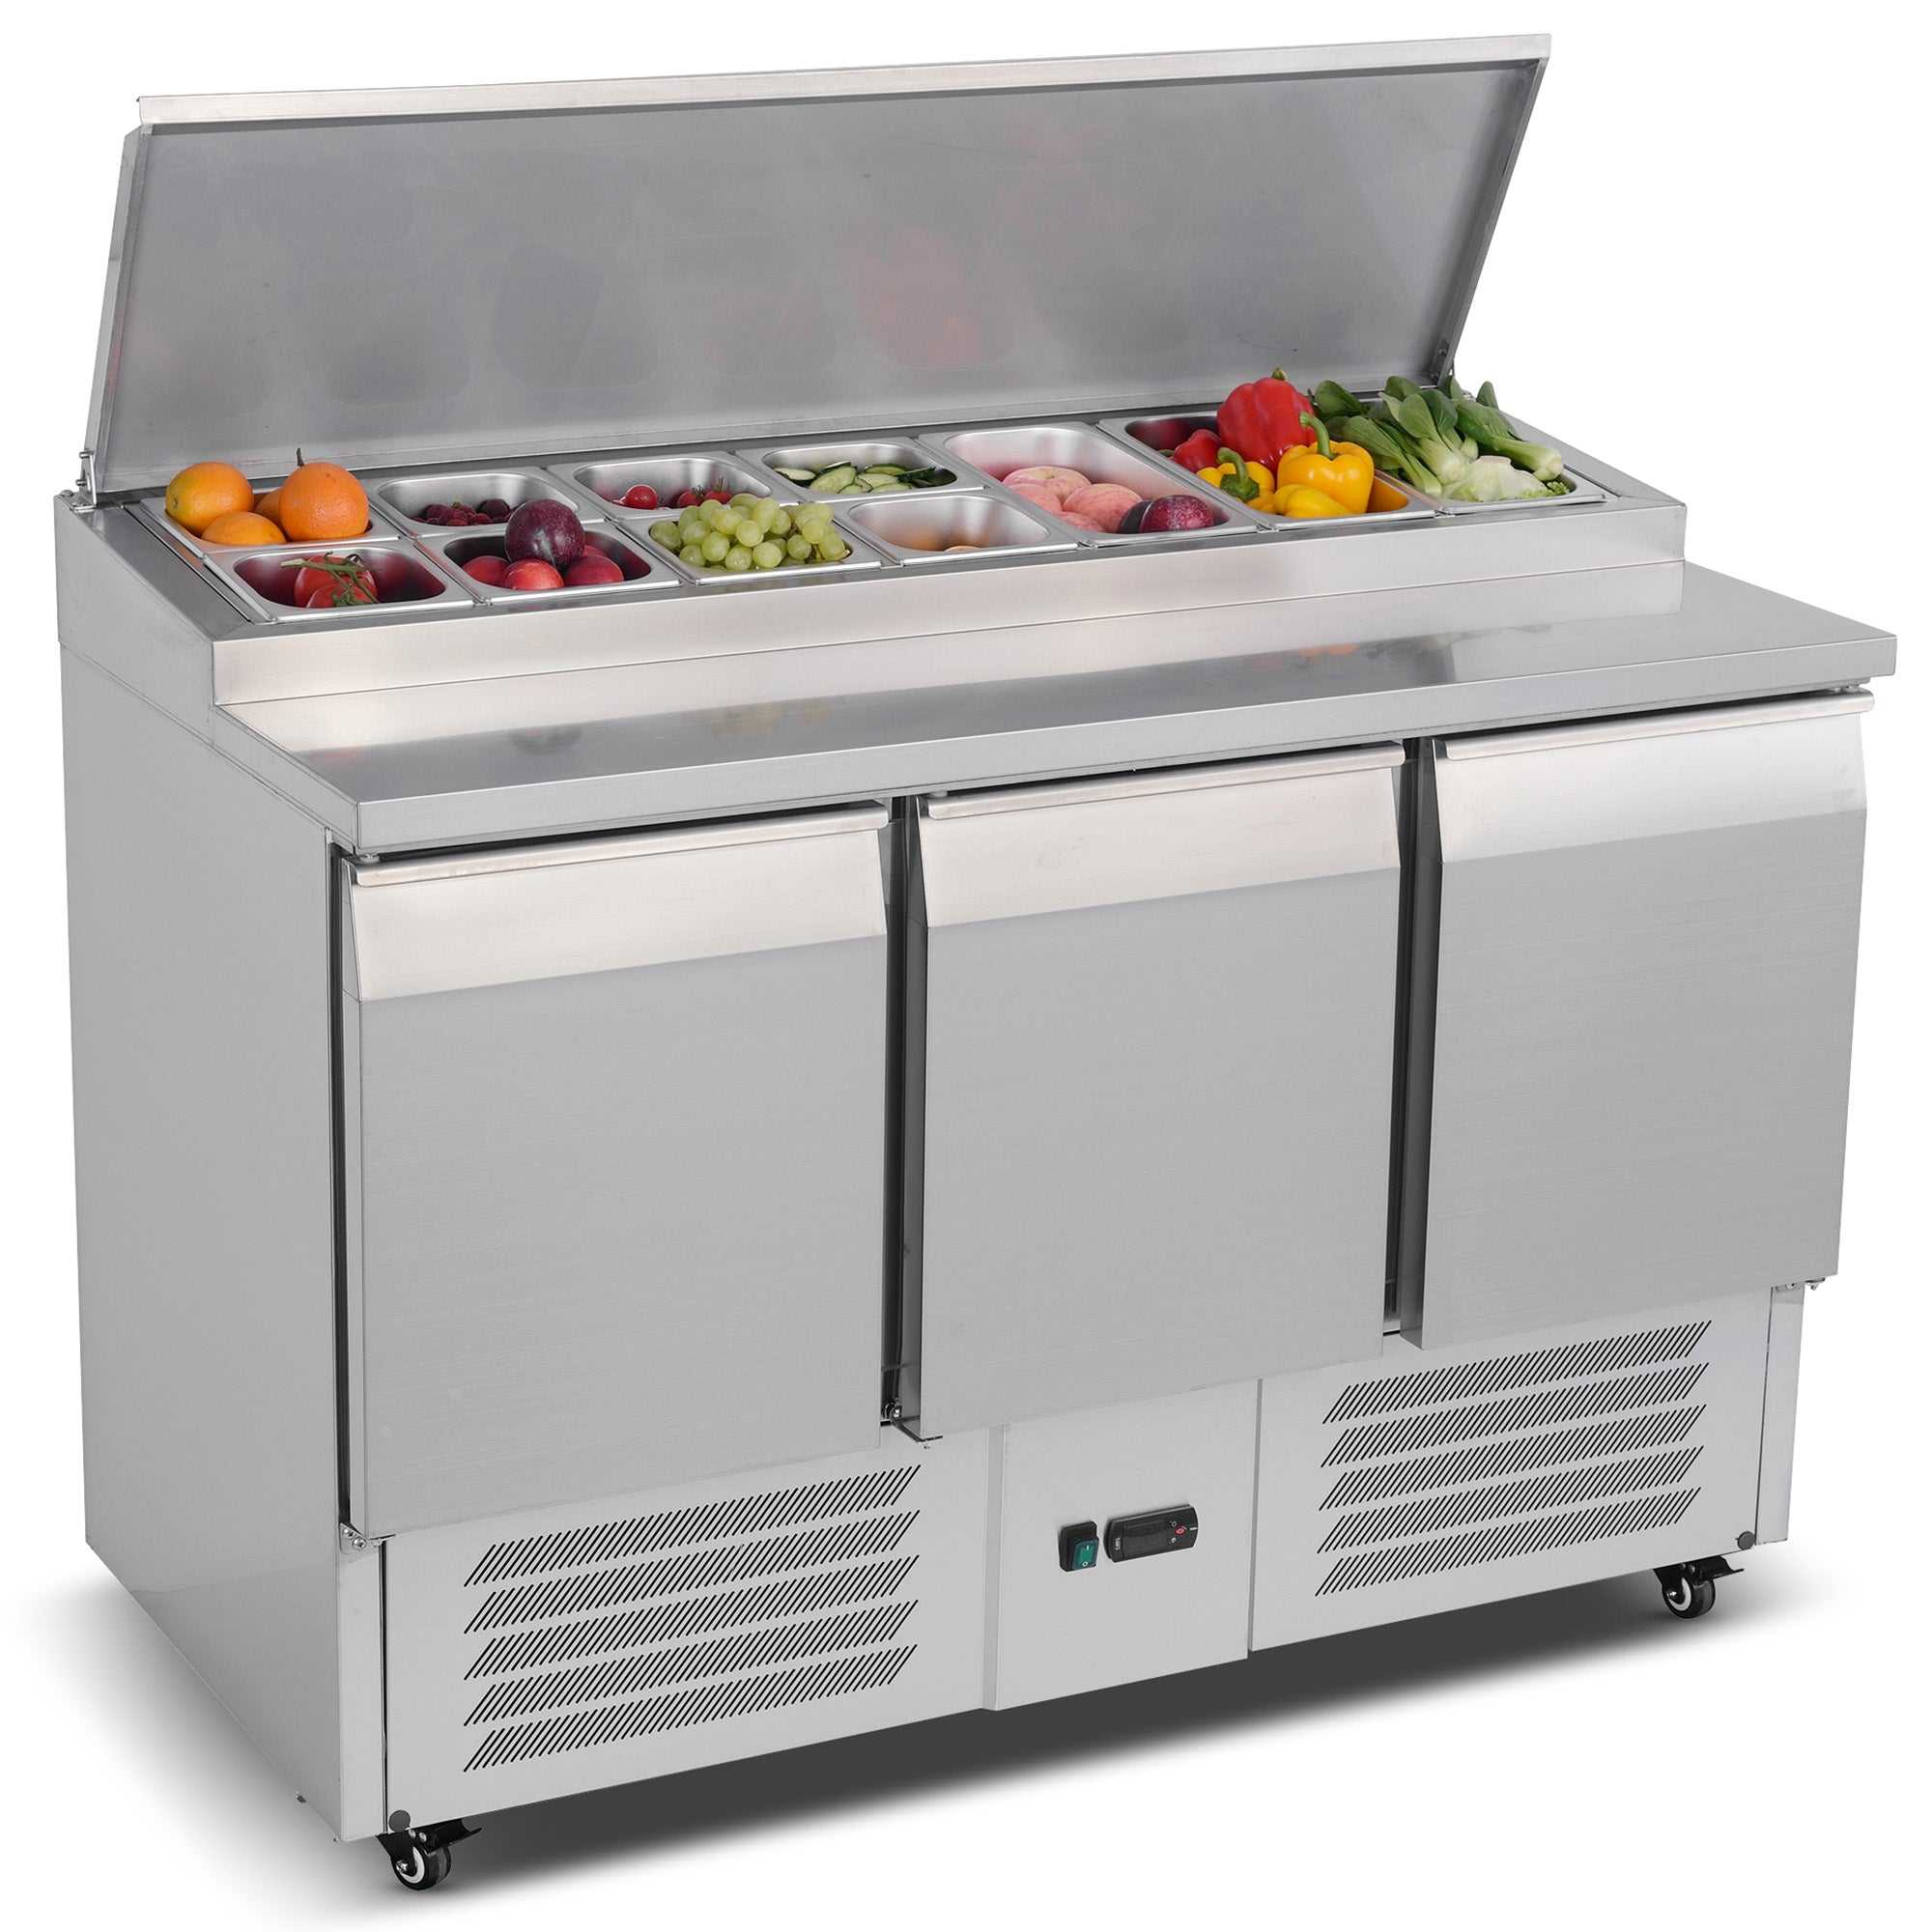 Carina Refrigerated Salad Workbench Stainless Steel Pizza and Salad Preparation Counter Commercial Display Case (PS300)